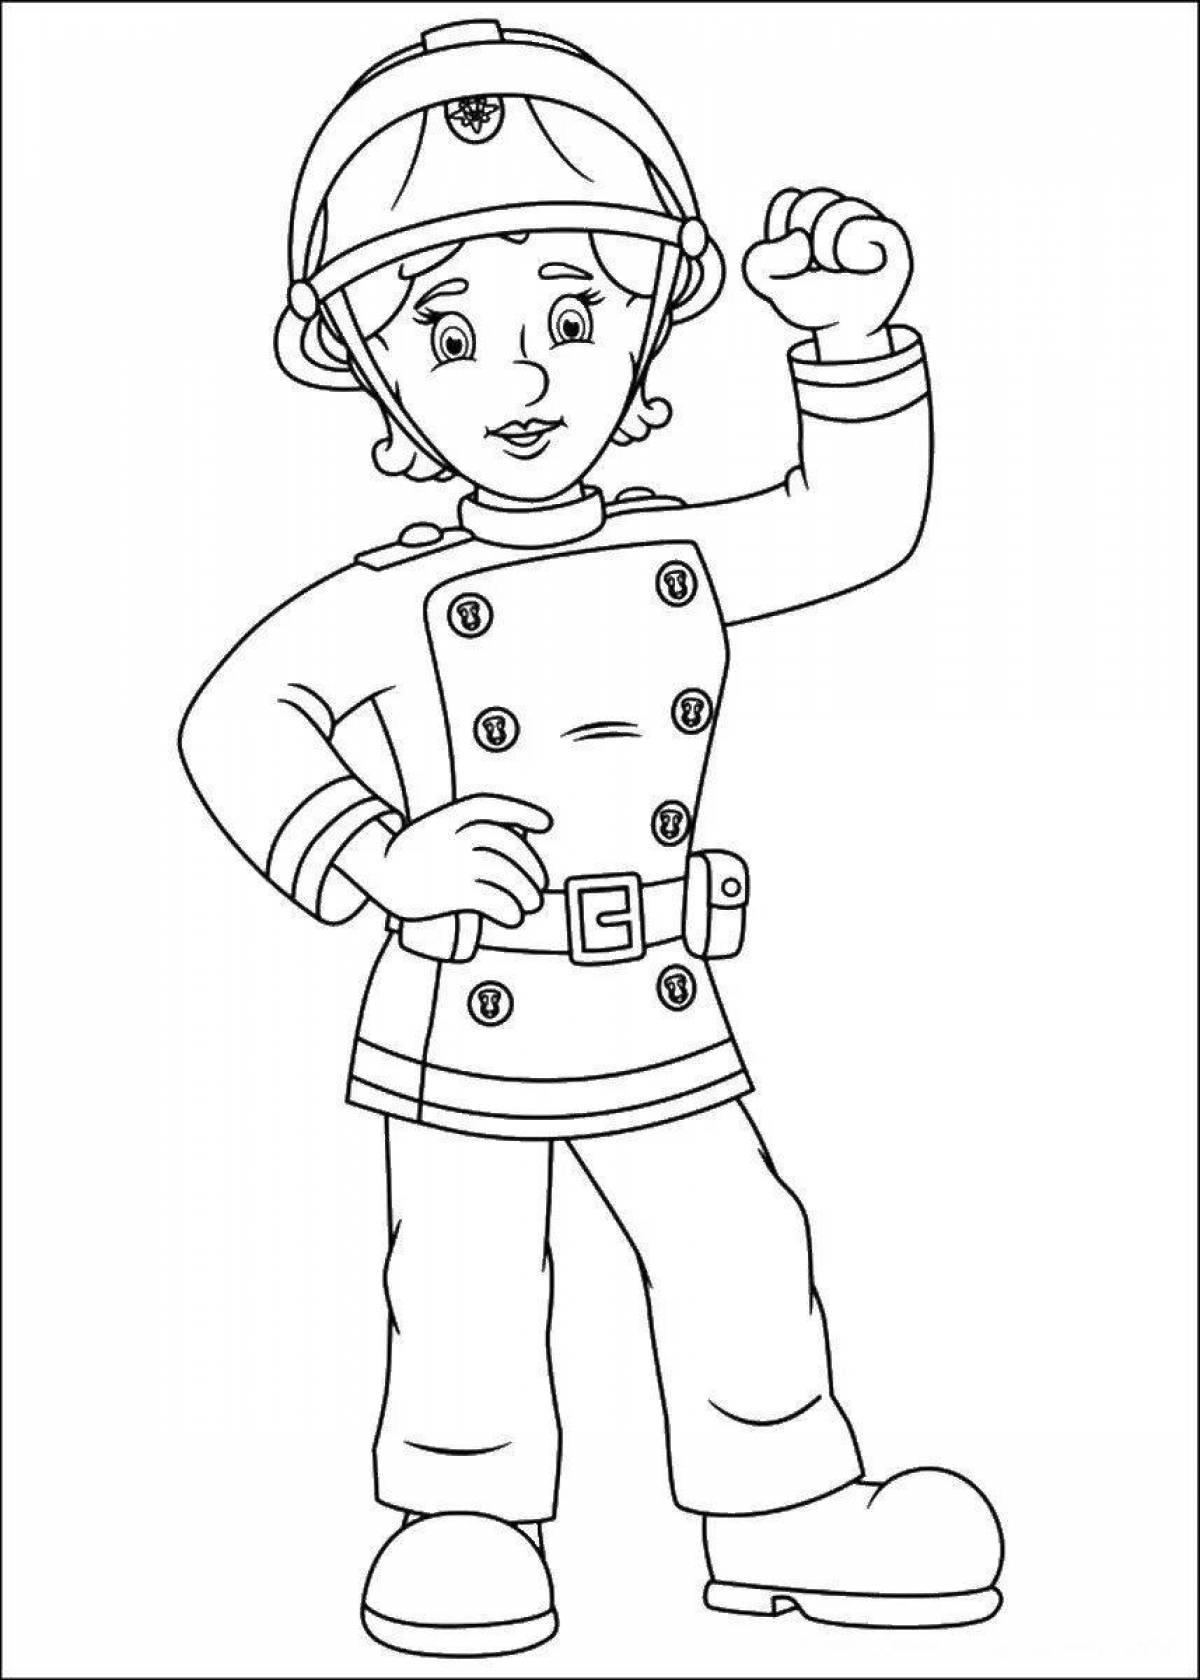 Intriguing fireman drawing for kids